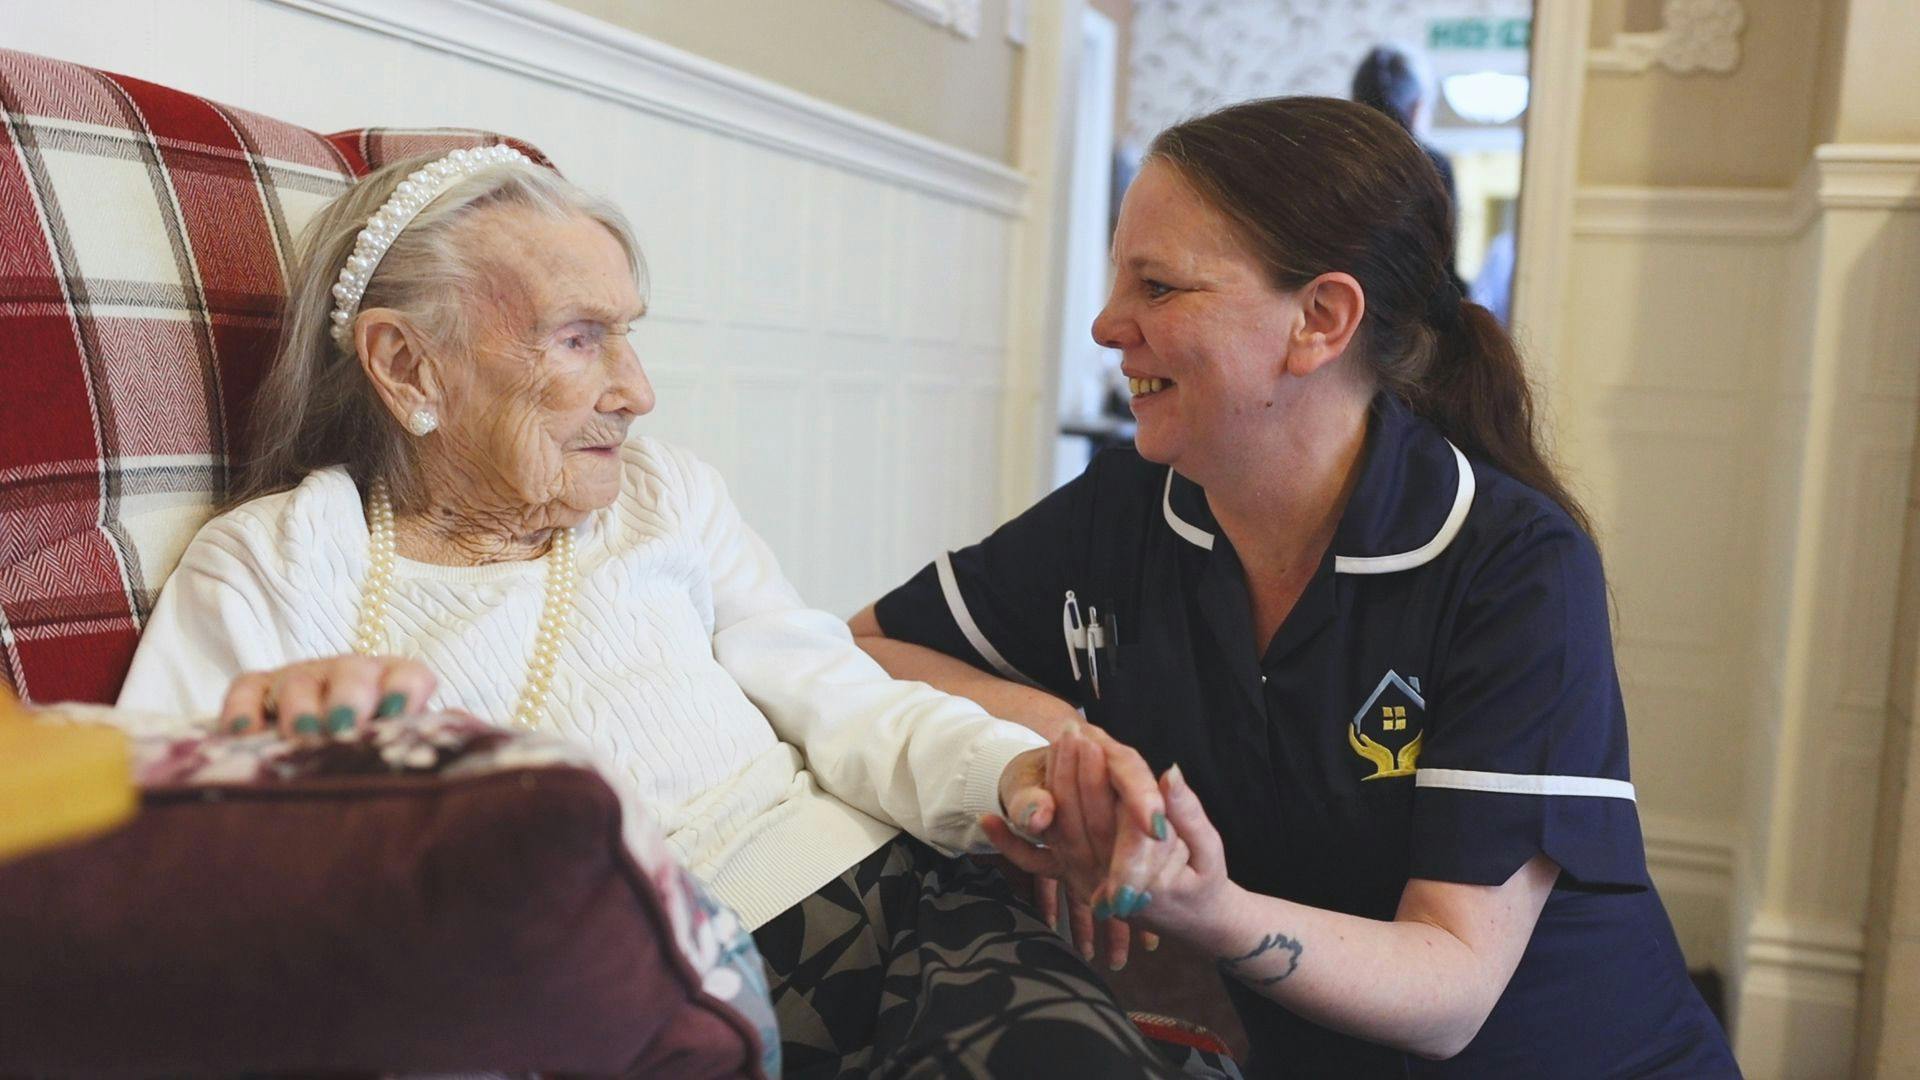 Caring & Leading - Abiden care home 005